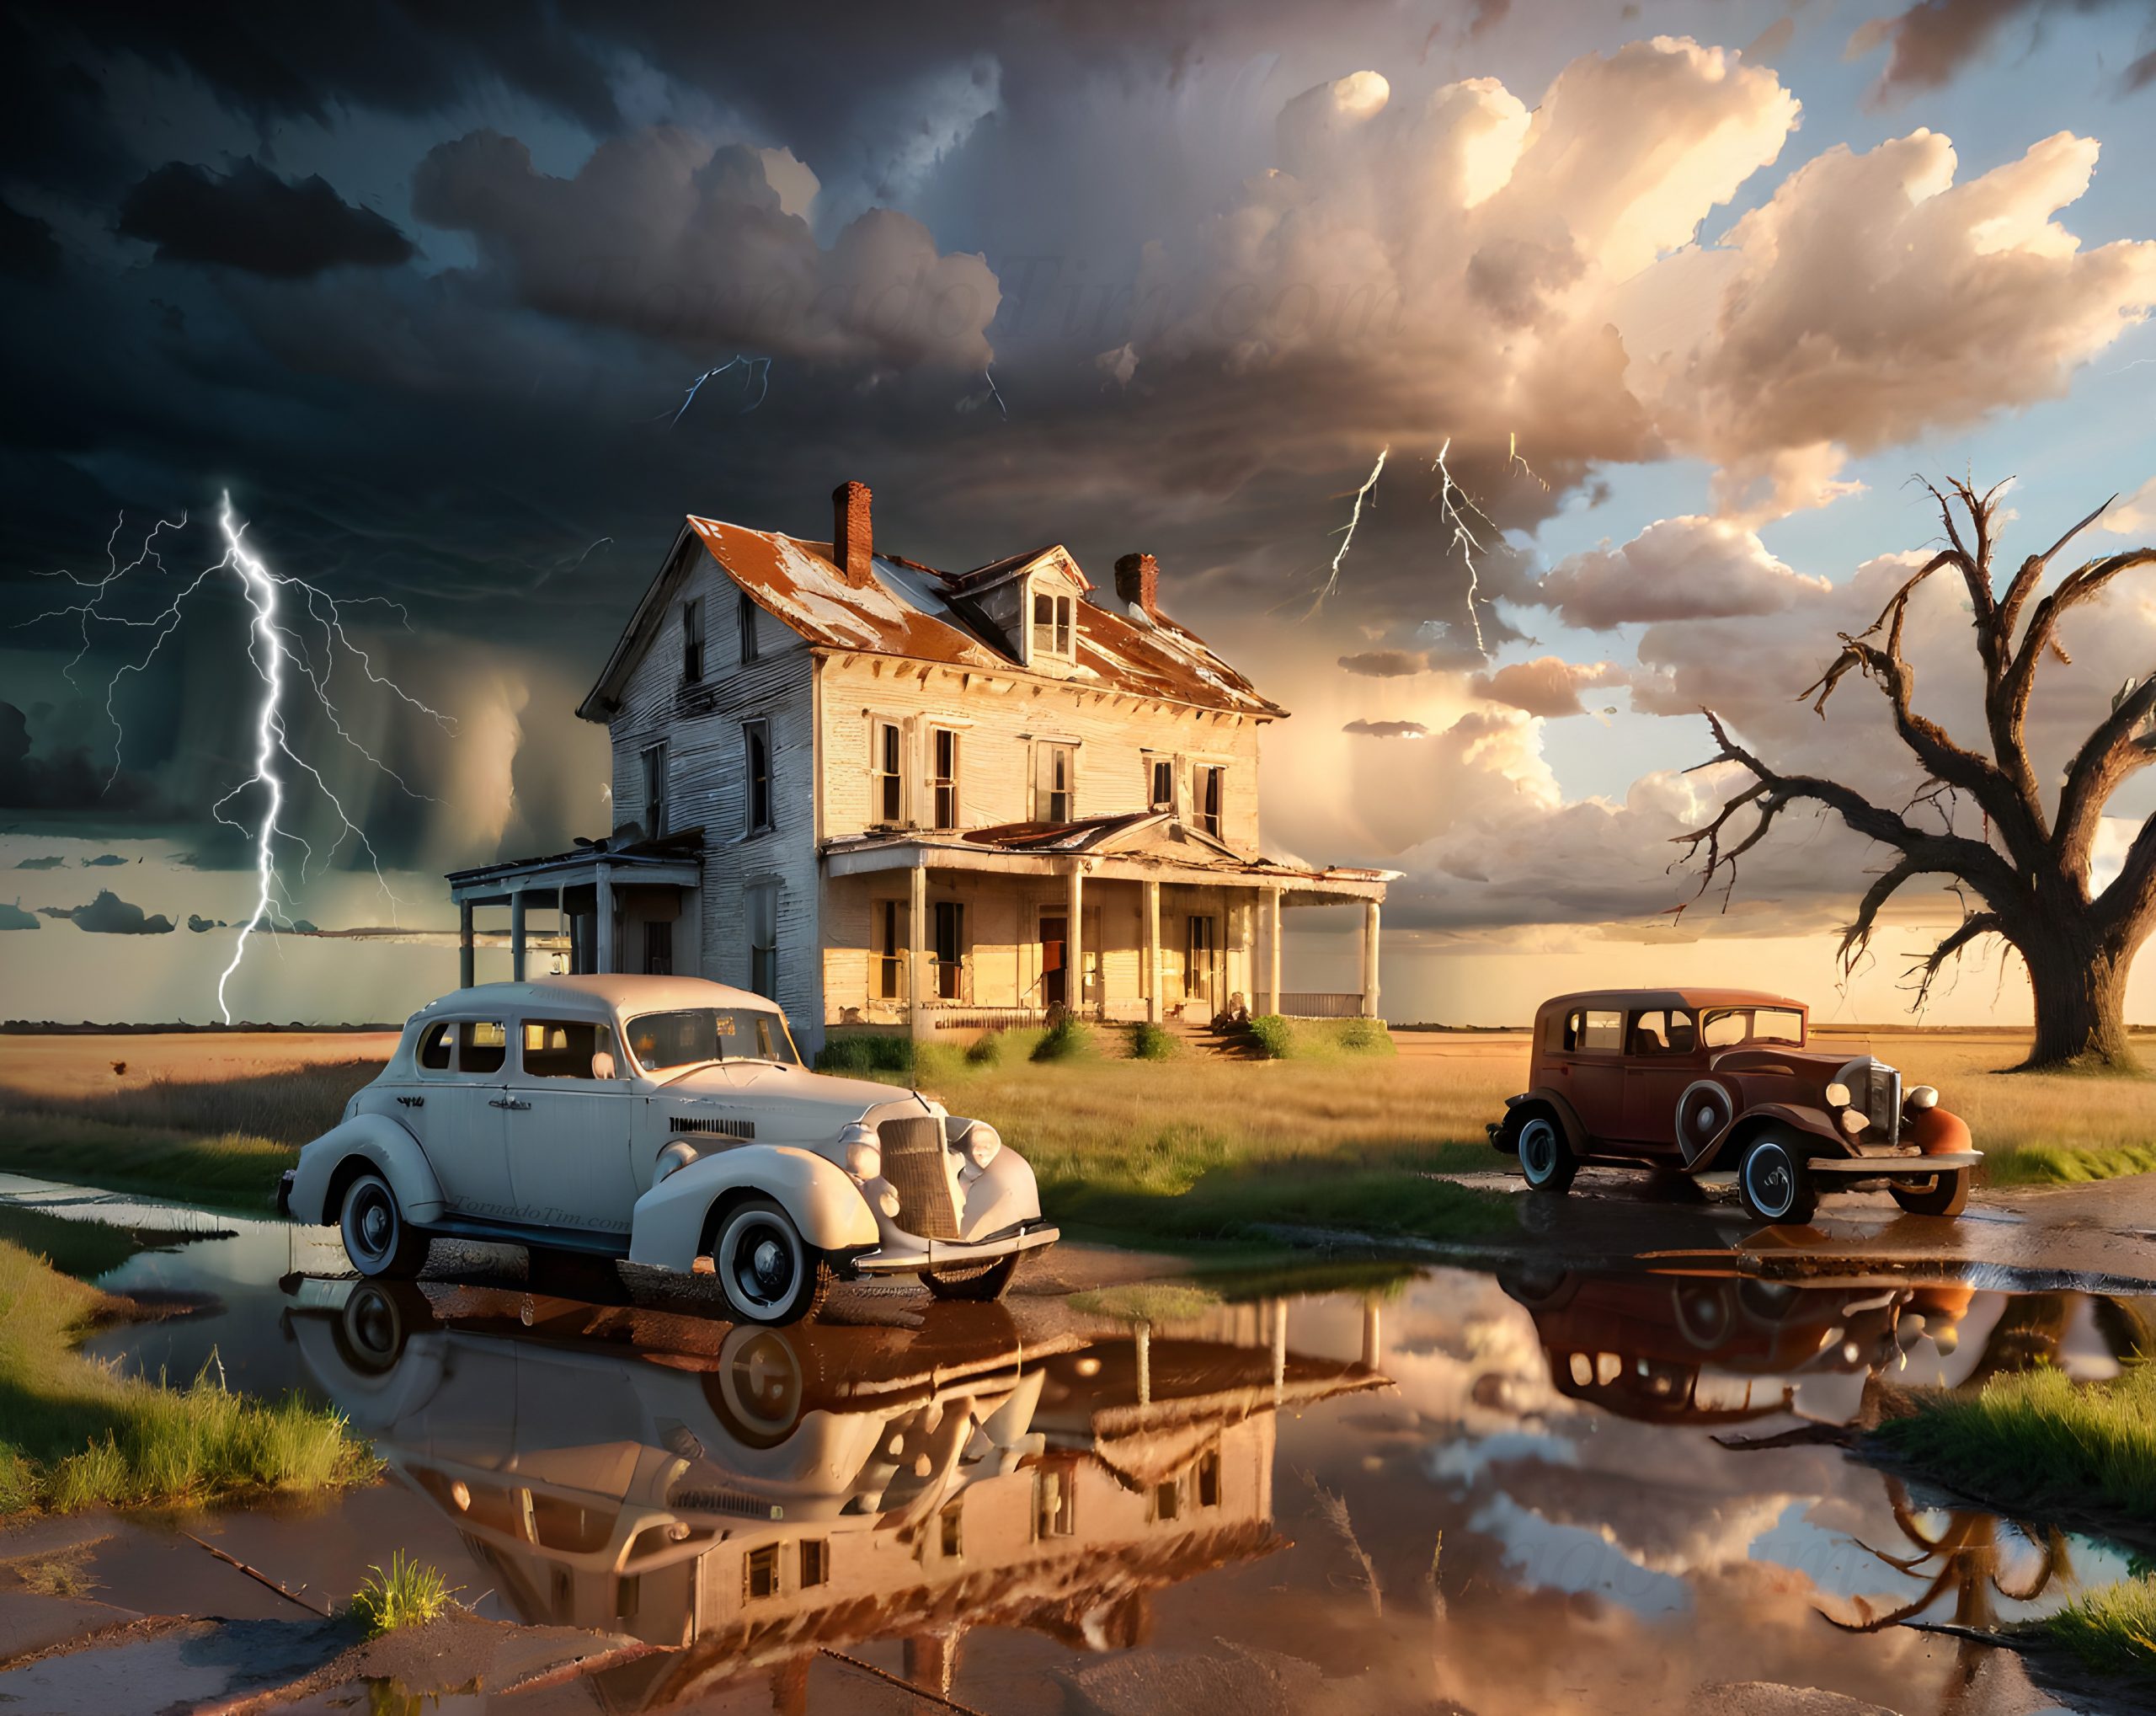 Classic cars with severe storms